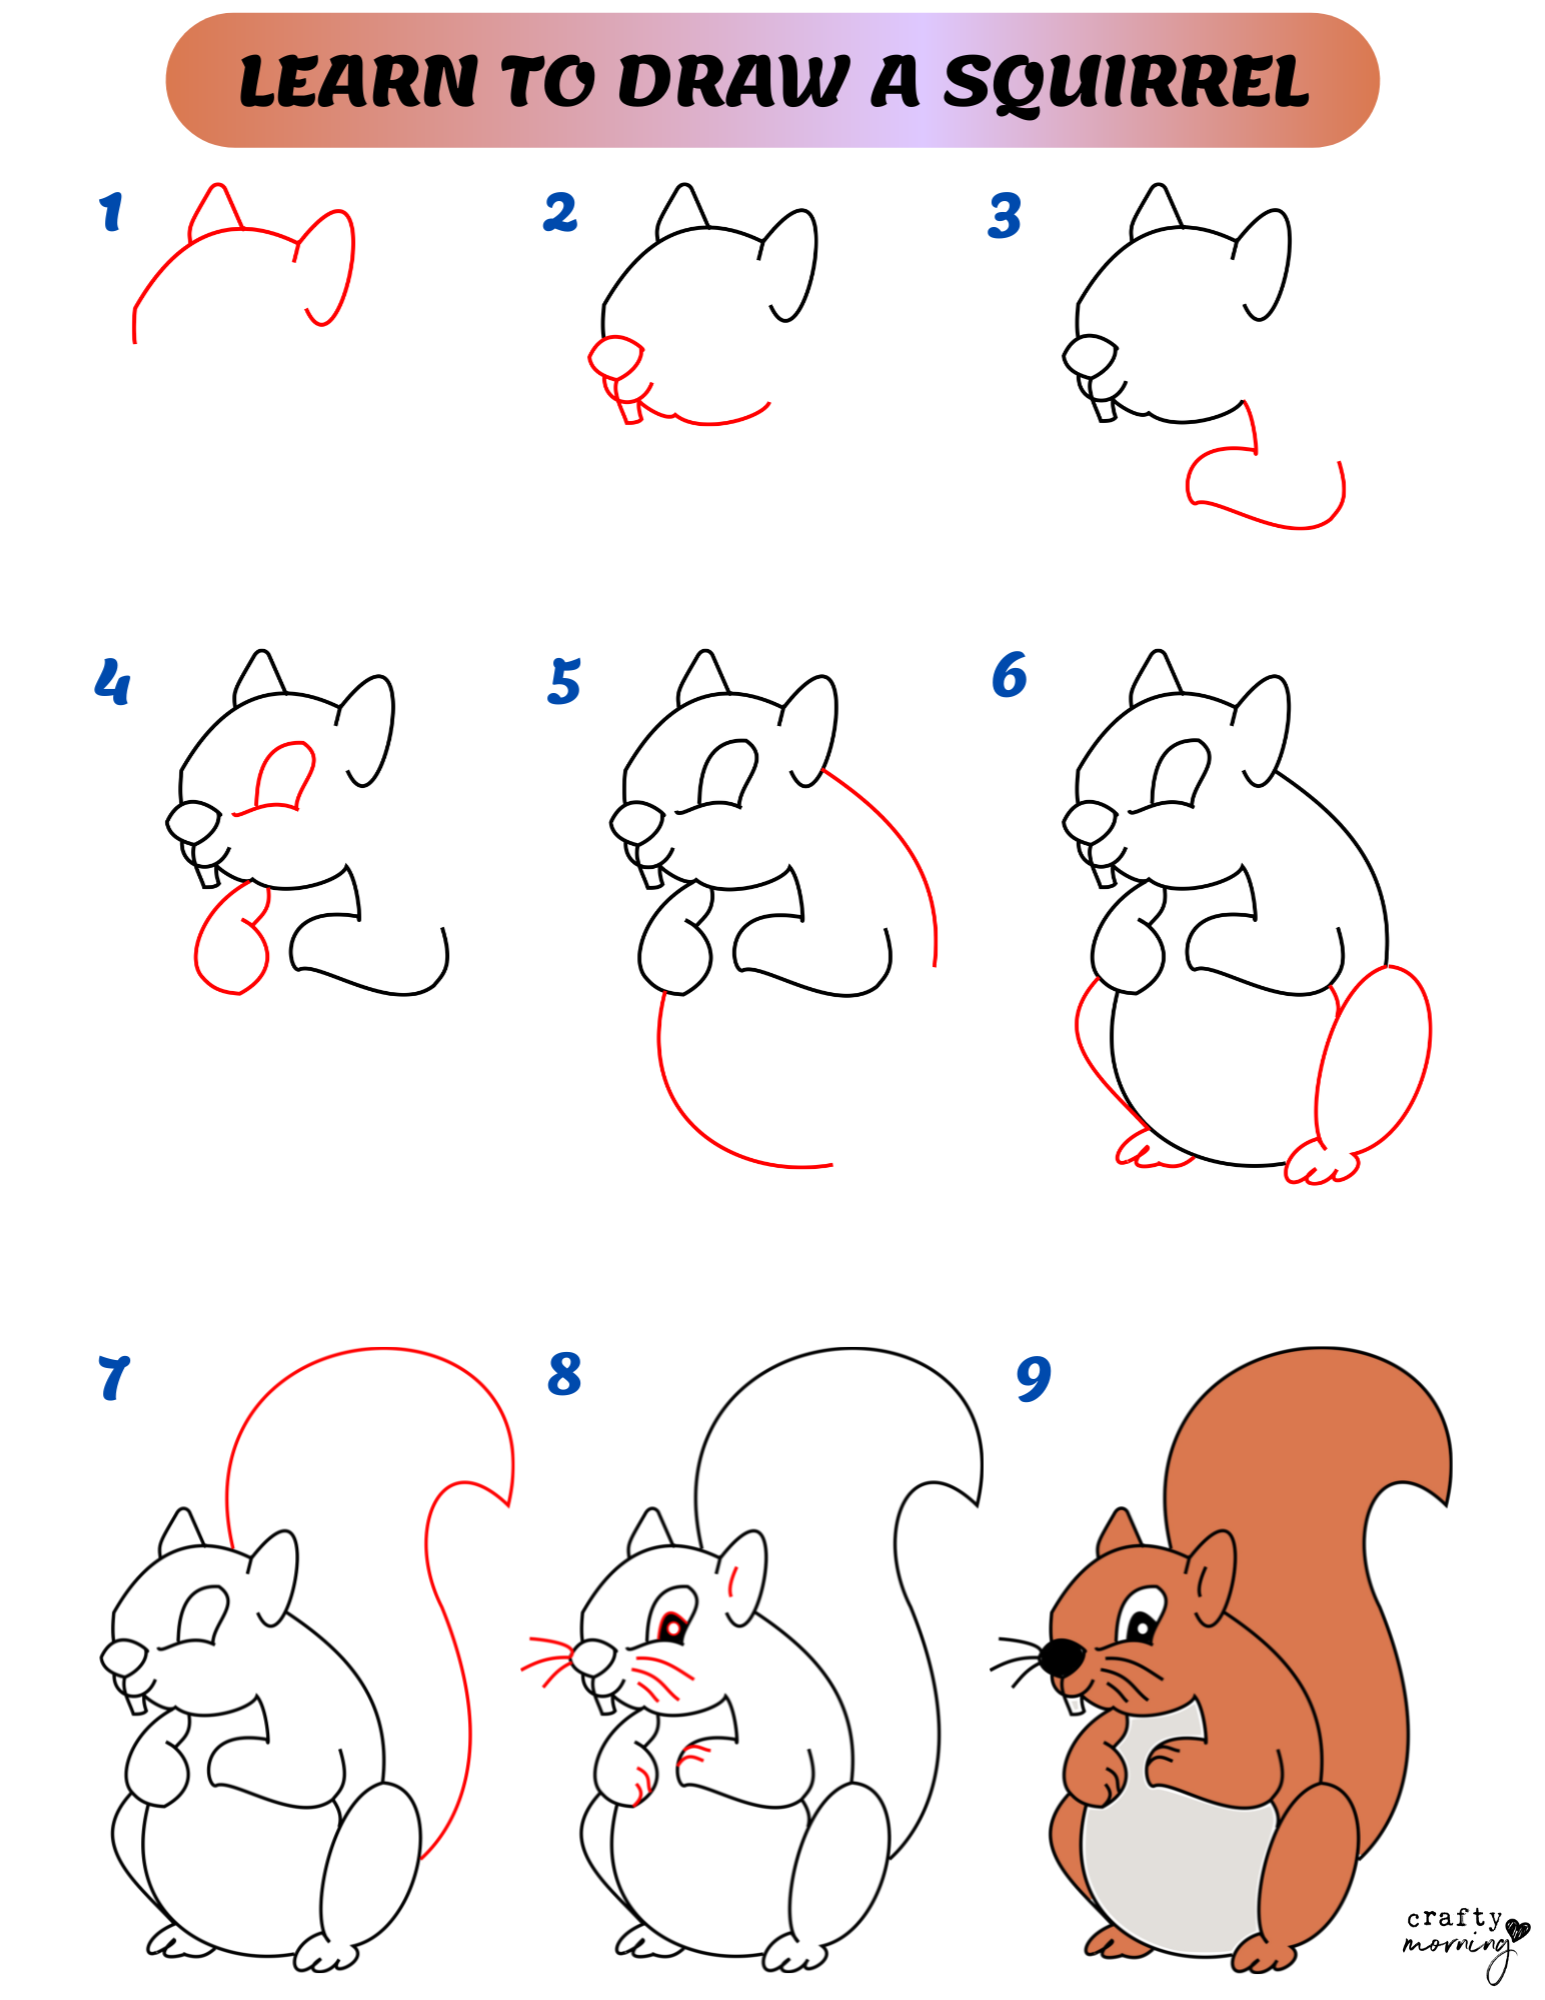 FREE! - Squirrel Craft | Squirrel Pictures to Print and Colour